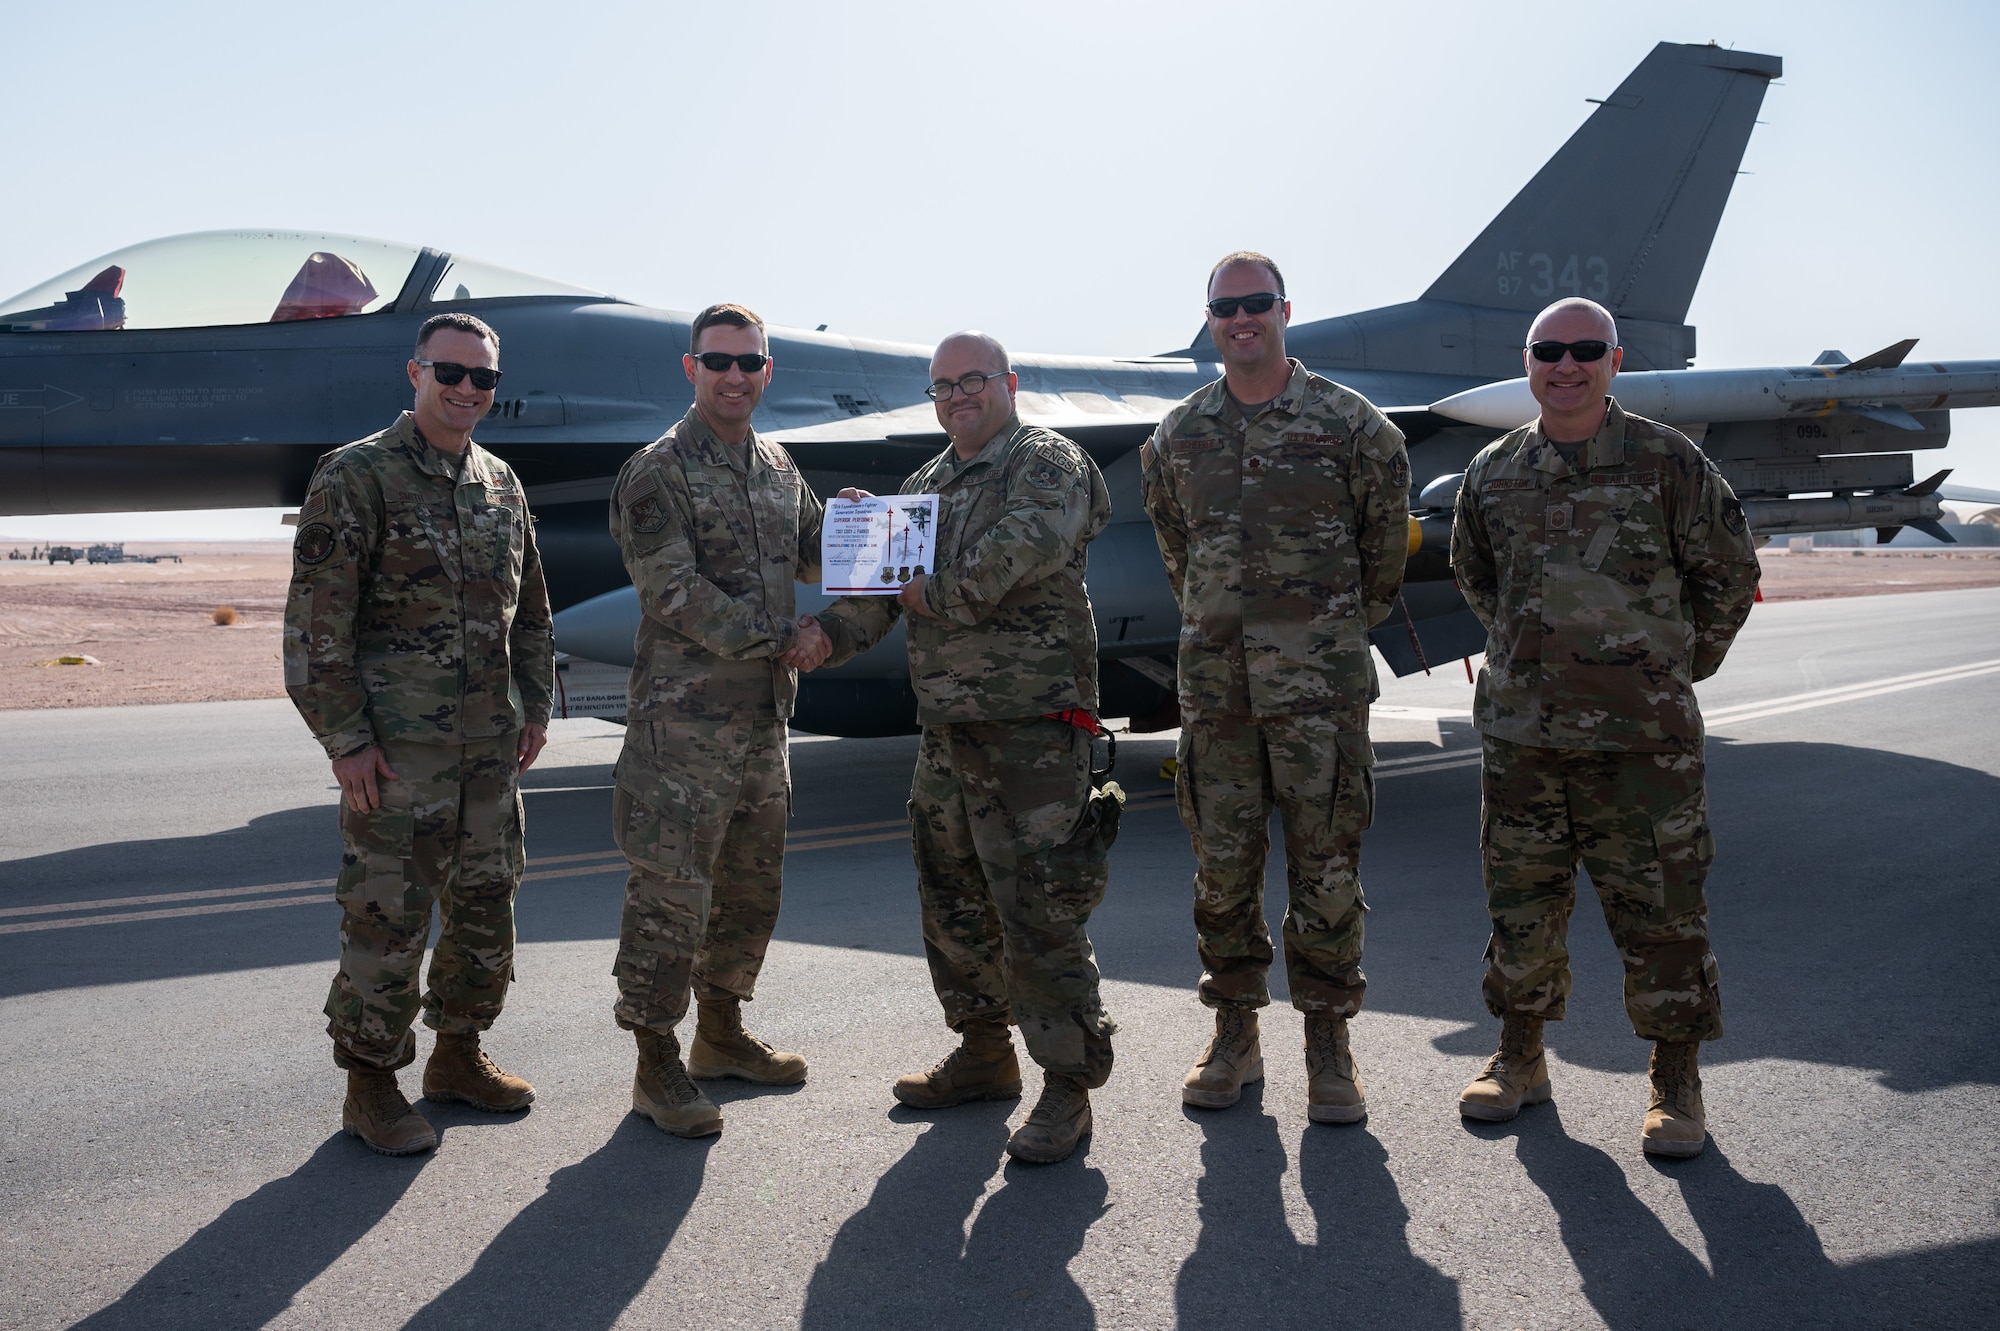 Tech Sgt. Cody J. Parrot, 176th Expeditionary Fighter Squadron aircraft electrical and environmental systems specialist, receives a superior performer certificate from Brig. Gen. Robert Davis, 378th Air Expeditionary Wing commander, at Prince Sultan Air Base, Kingdom of Saudi Arabia, Nov. 23, 2021. Parrot was recognized for his superior performance in Iron Falcon 2021, a bilateral training exercise with Saudi coalition partners. (U.S. Air Force photo by Senior Airman Jacob B. Wrightsman)